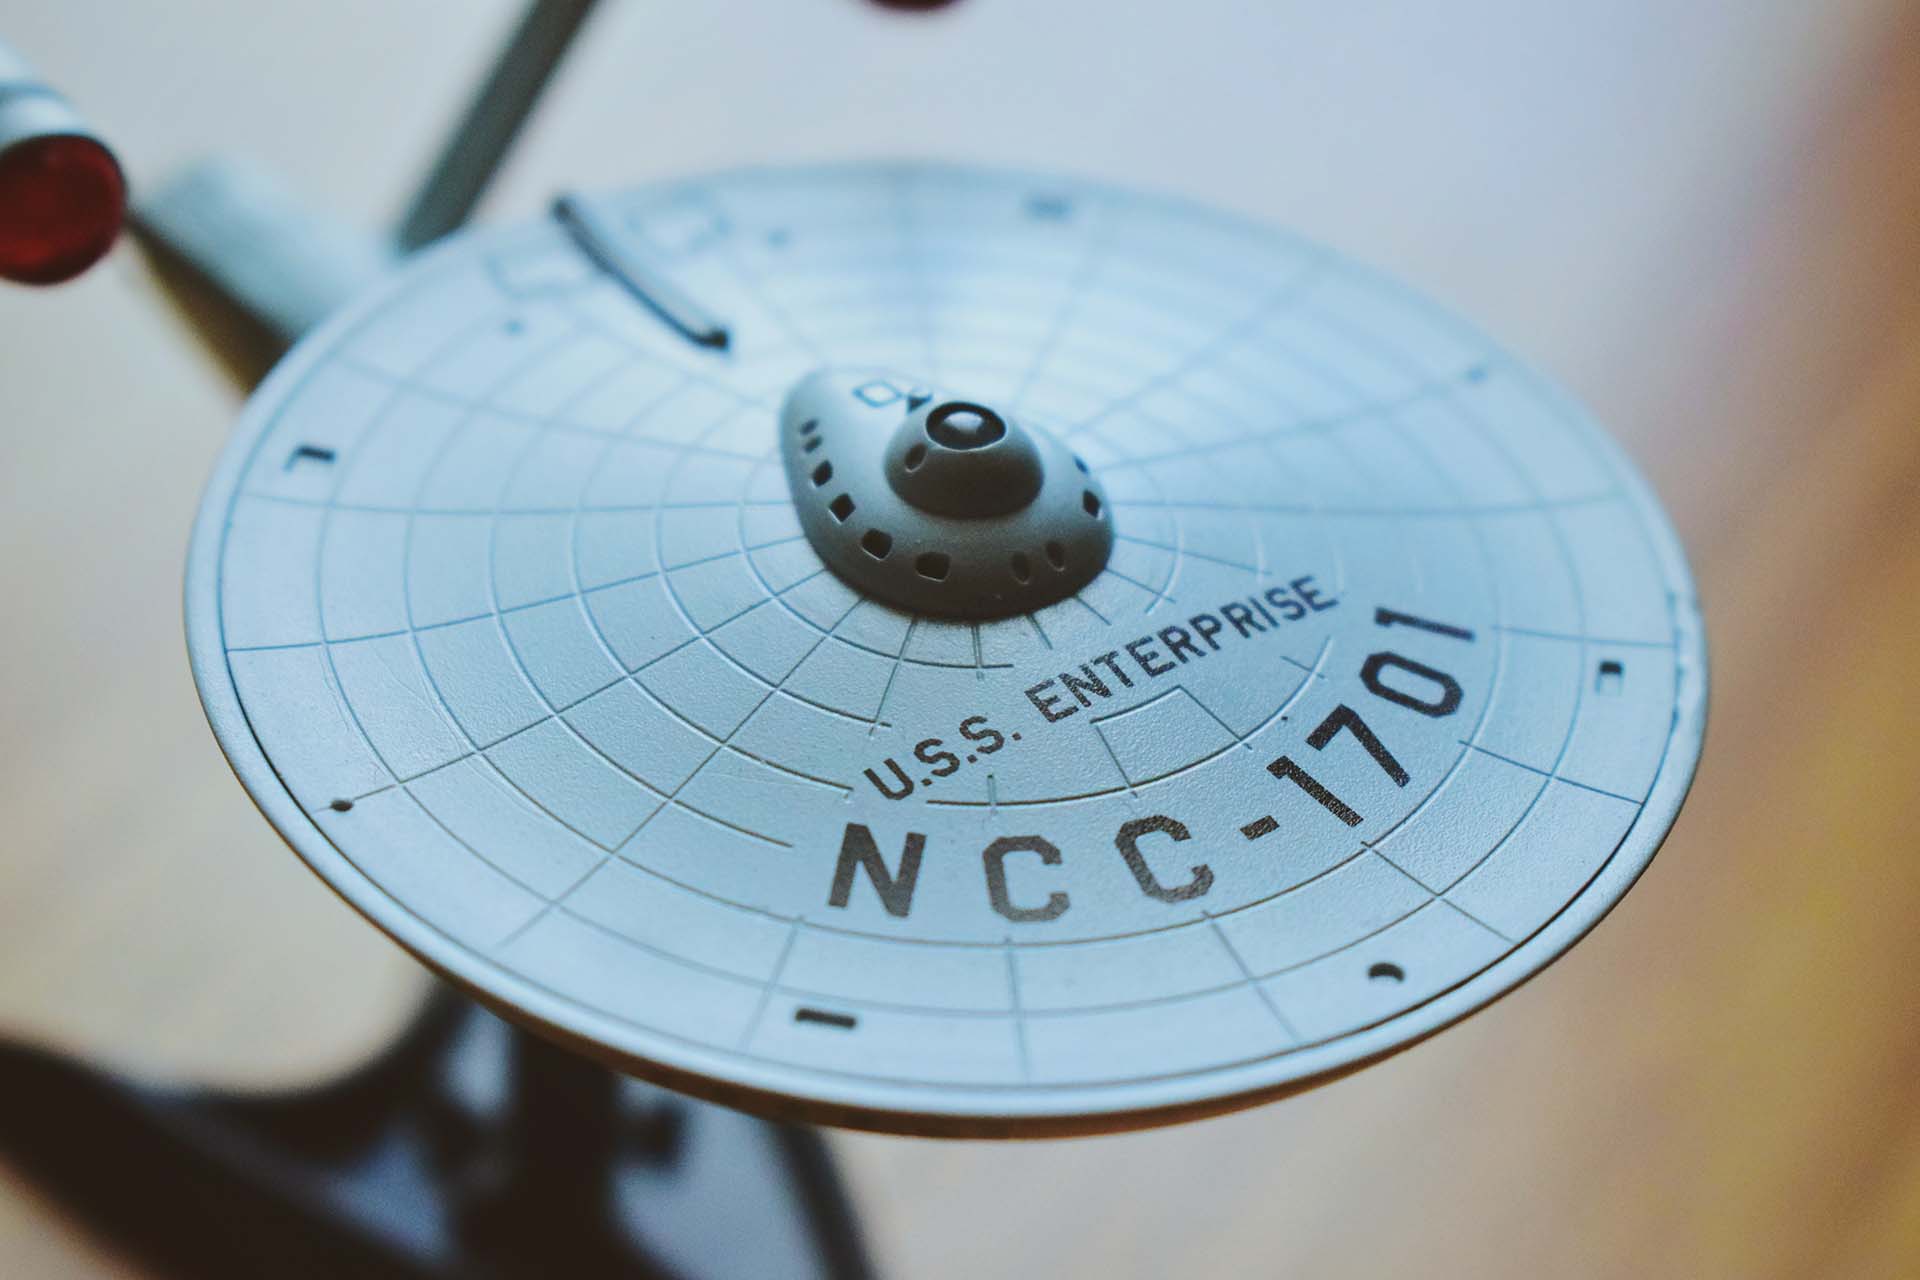 t2informatik Blog: What we can learn from starship Enterprise